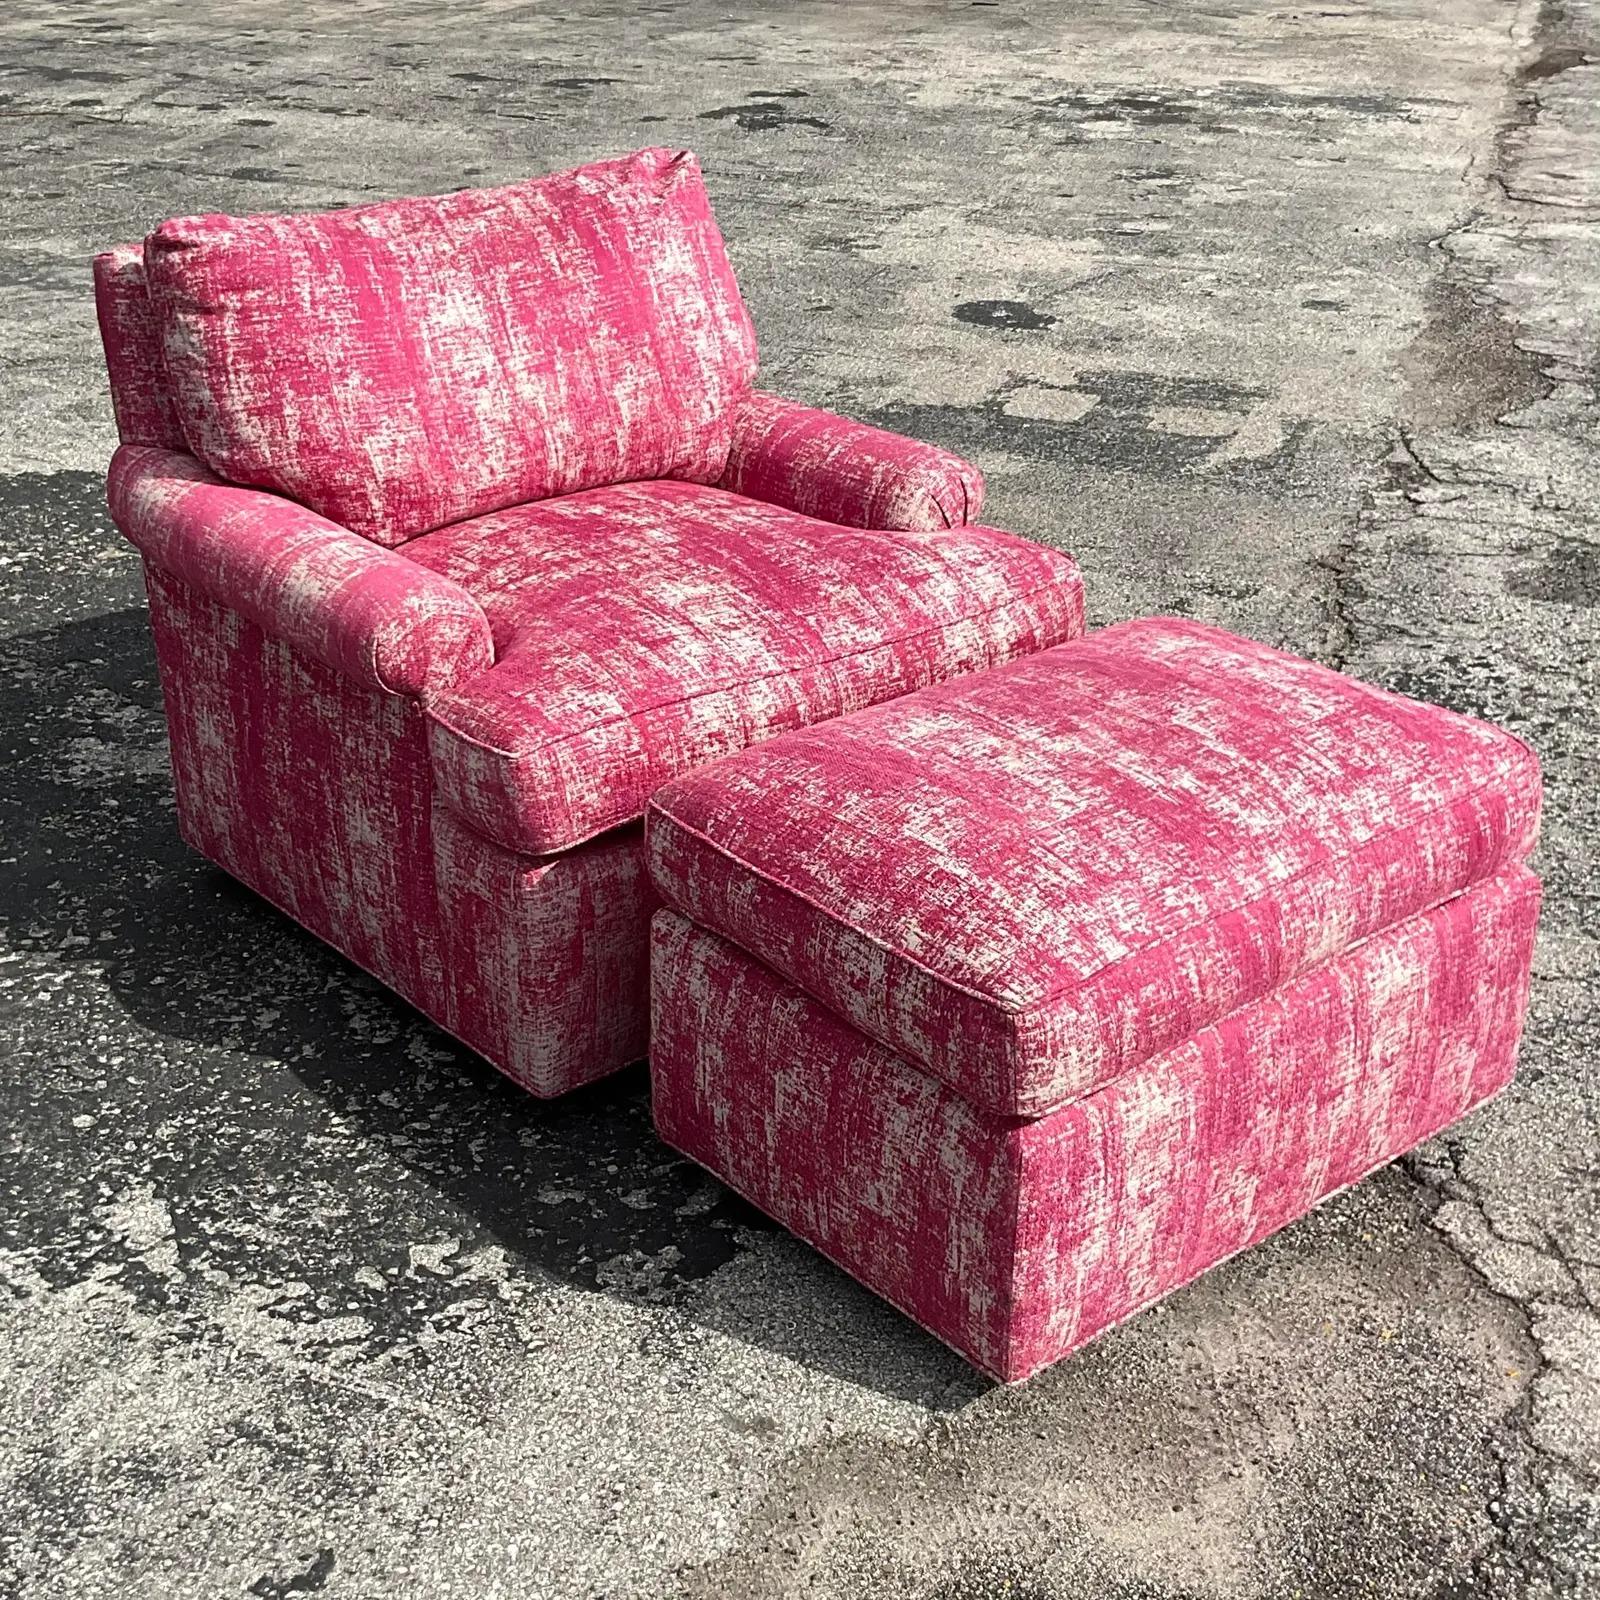 A fabulous vintage Boho lounge chair and ottoman set. Deep and wide design for maximum comfort. Brilliant hot pink color makes this set a real standout. Perfect reading chair. Acquired from a Palm Beach estate.